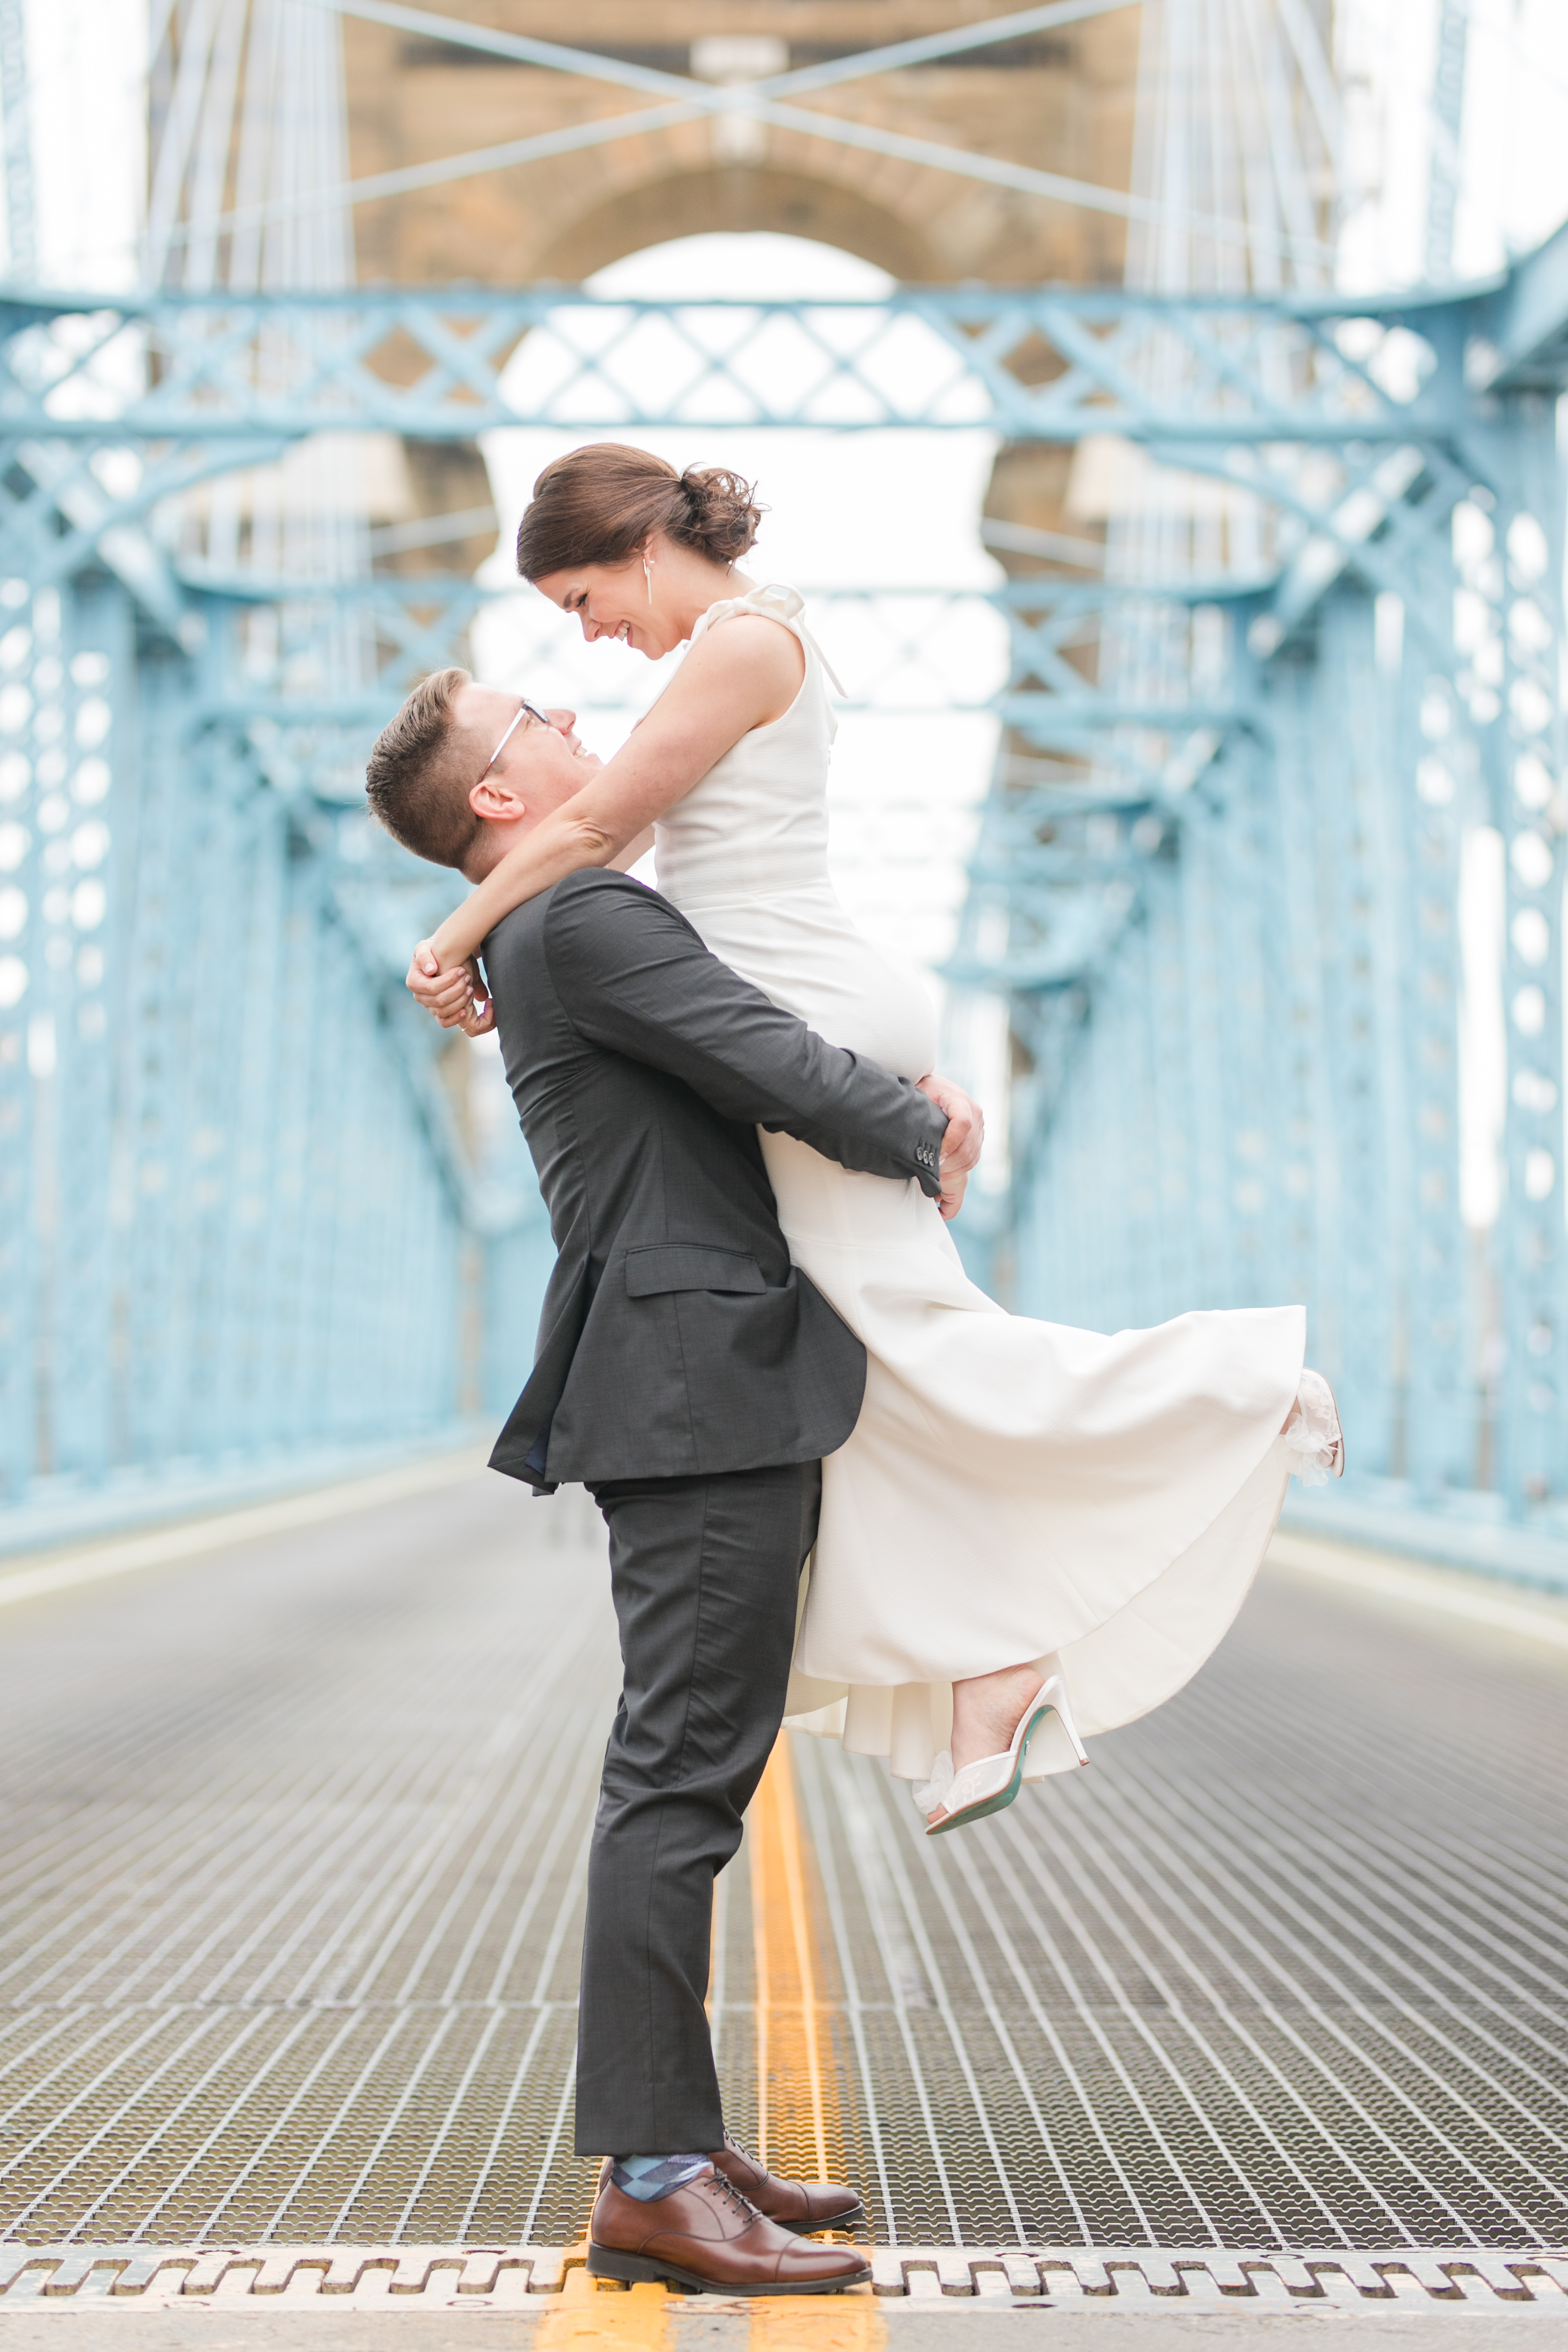 Northern Kentucky Wedding featuring the Roebling Brigde with a groom picking up a bride in a white dress